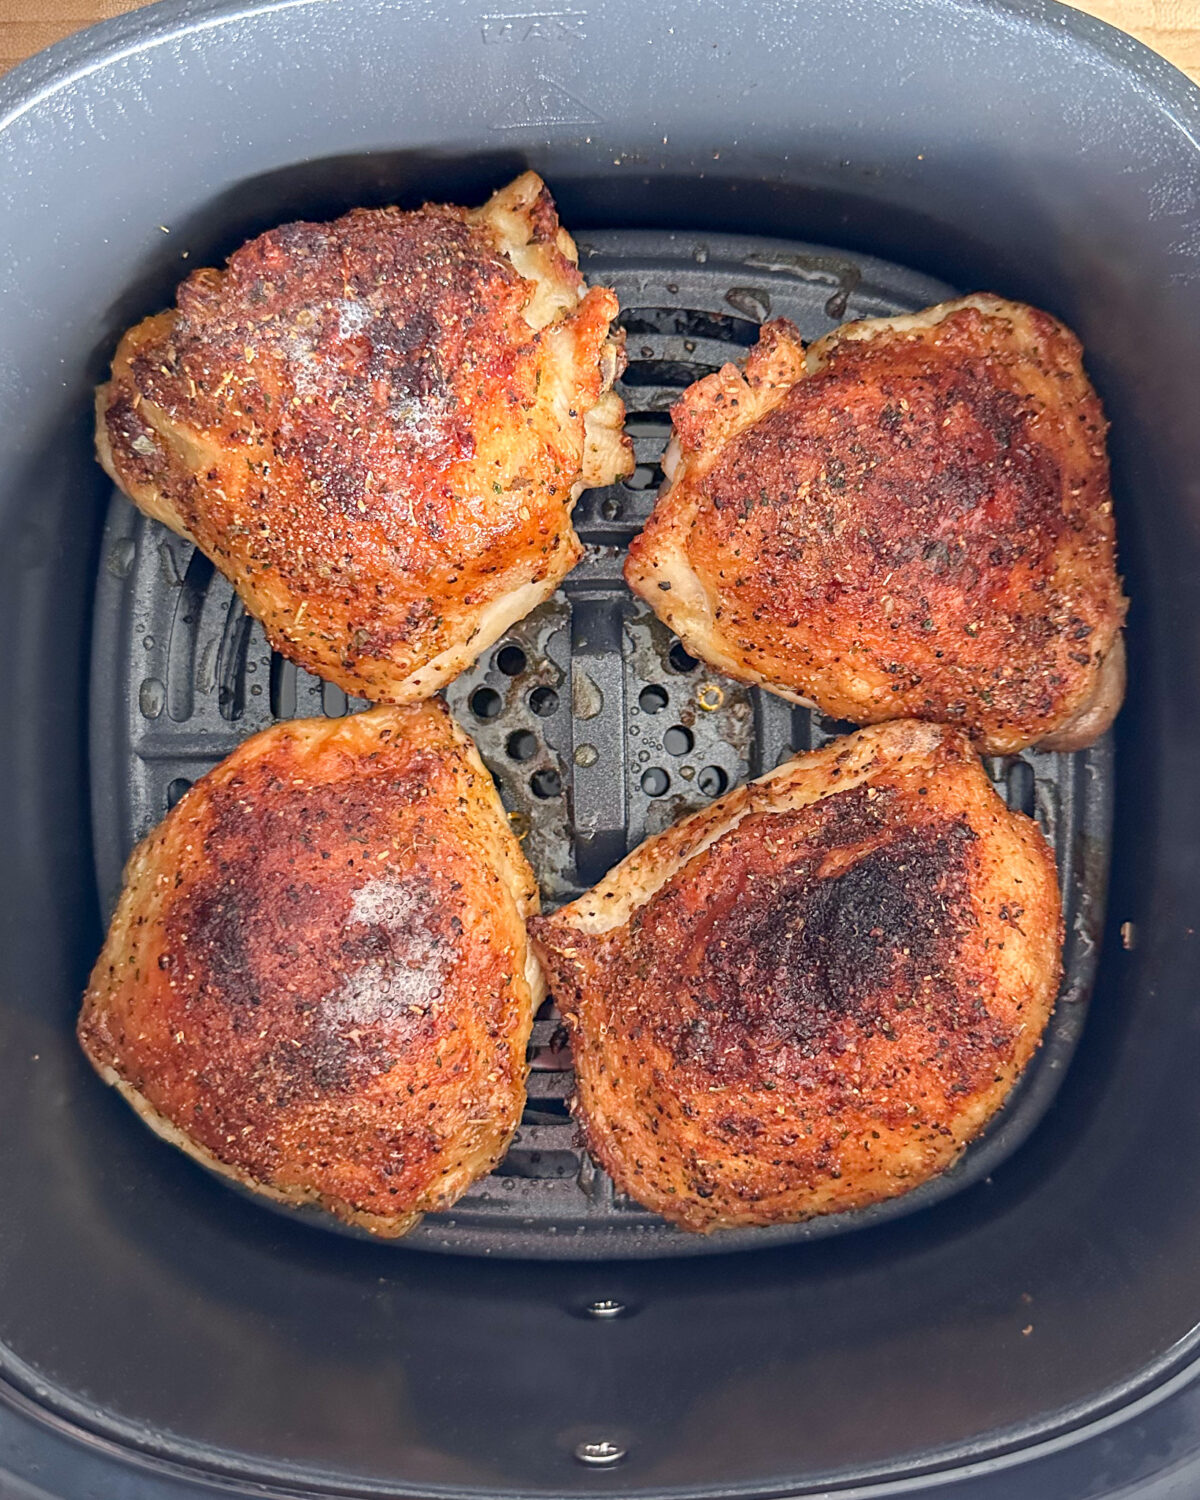 Just cooked four easy air fryer chicken thighs.